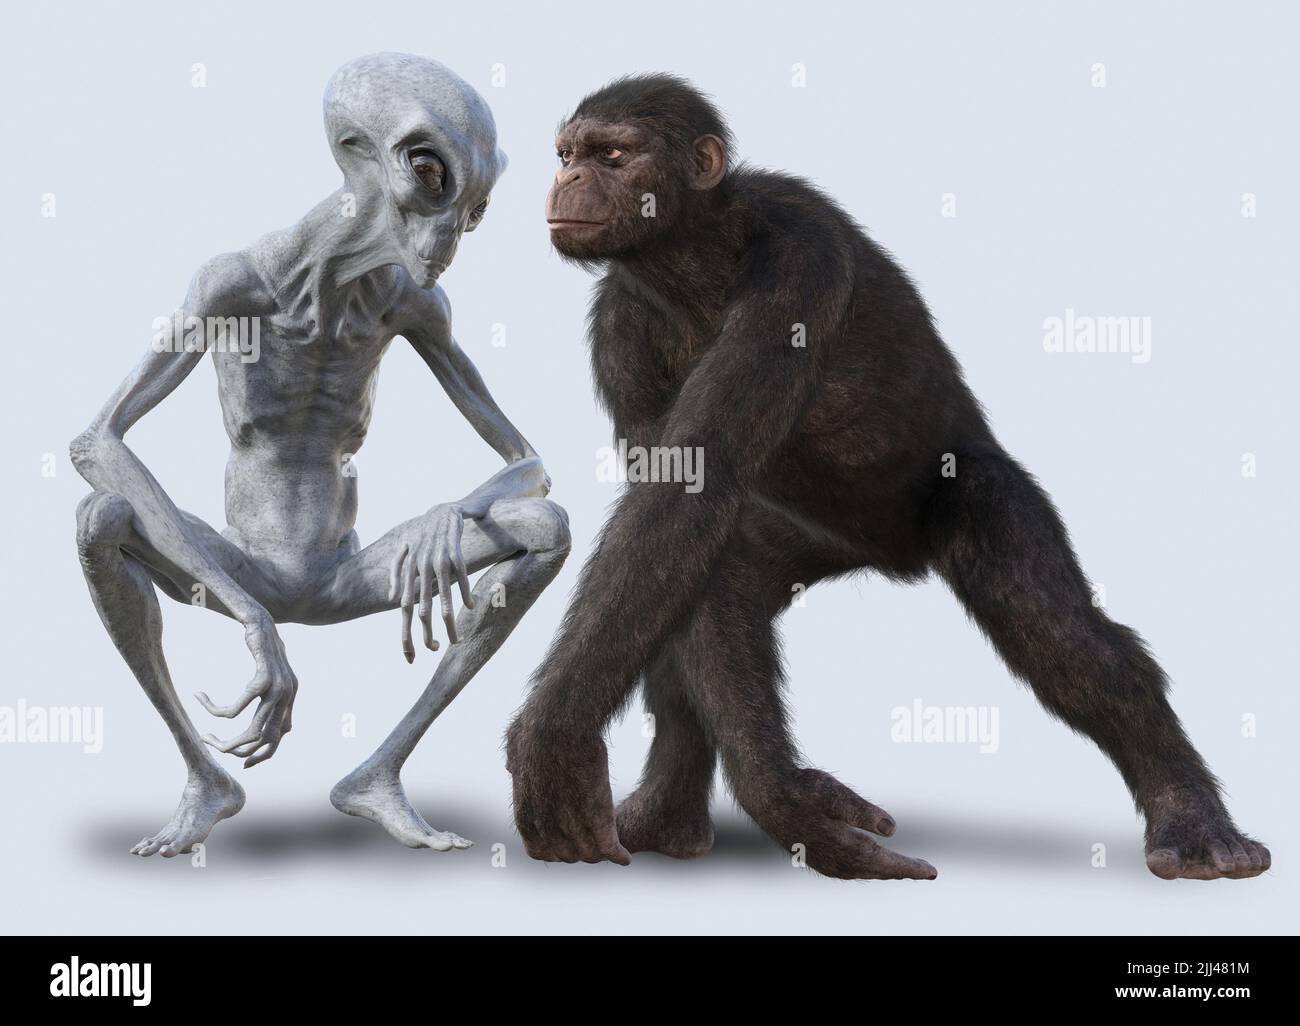 Conceptual illustration of ancient astronaut hypothesis, a pseudoscientific hypothesis that extraterrestrial beings meet with Stock Photo